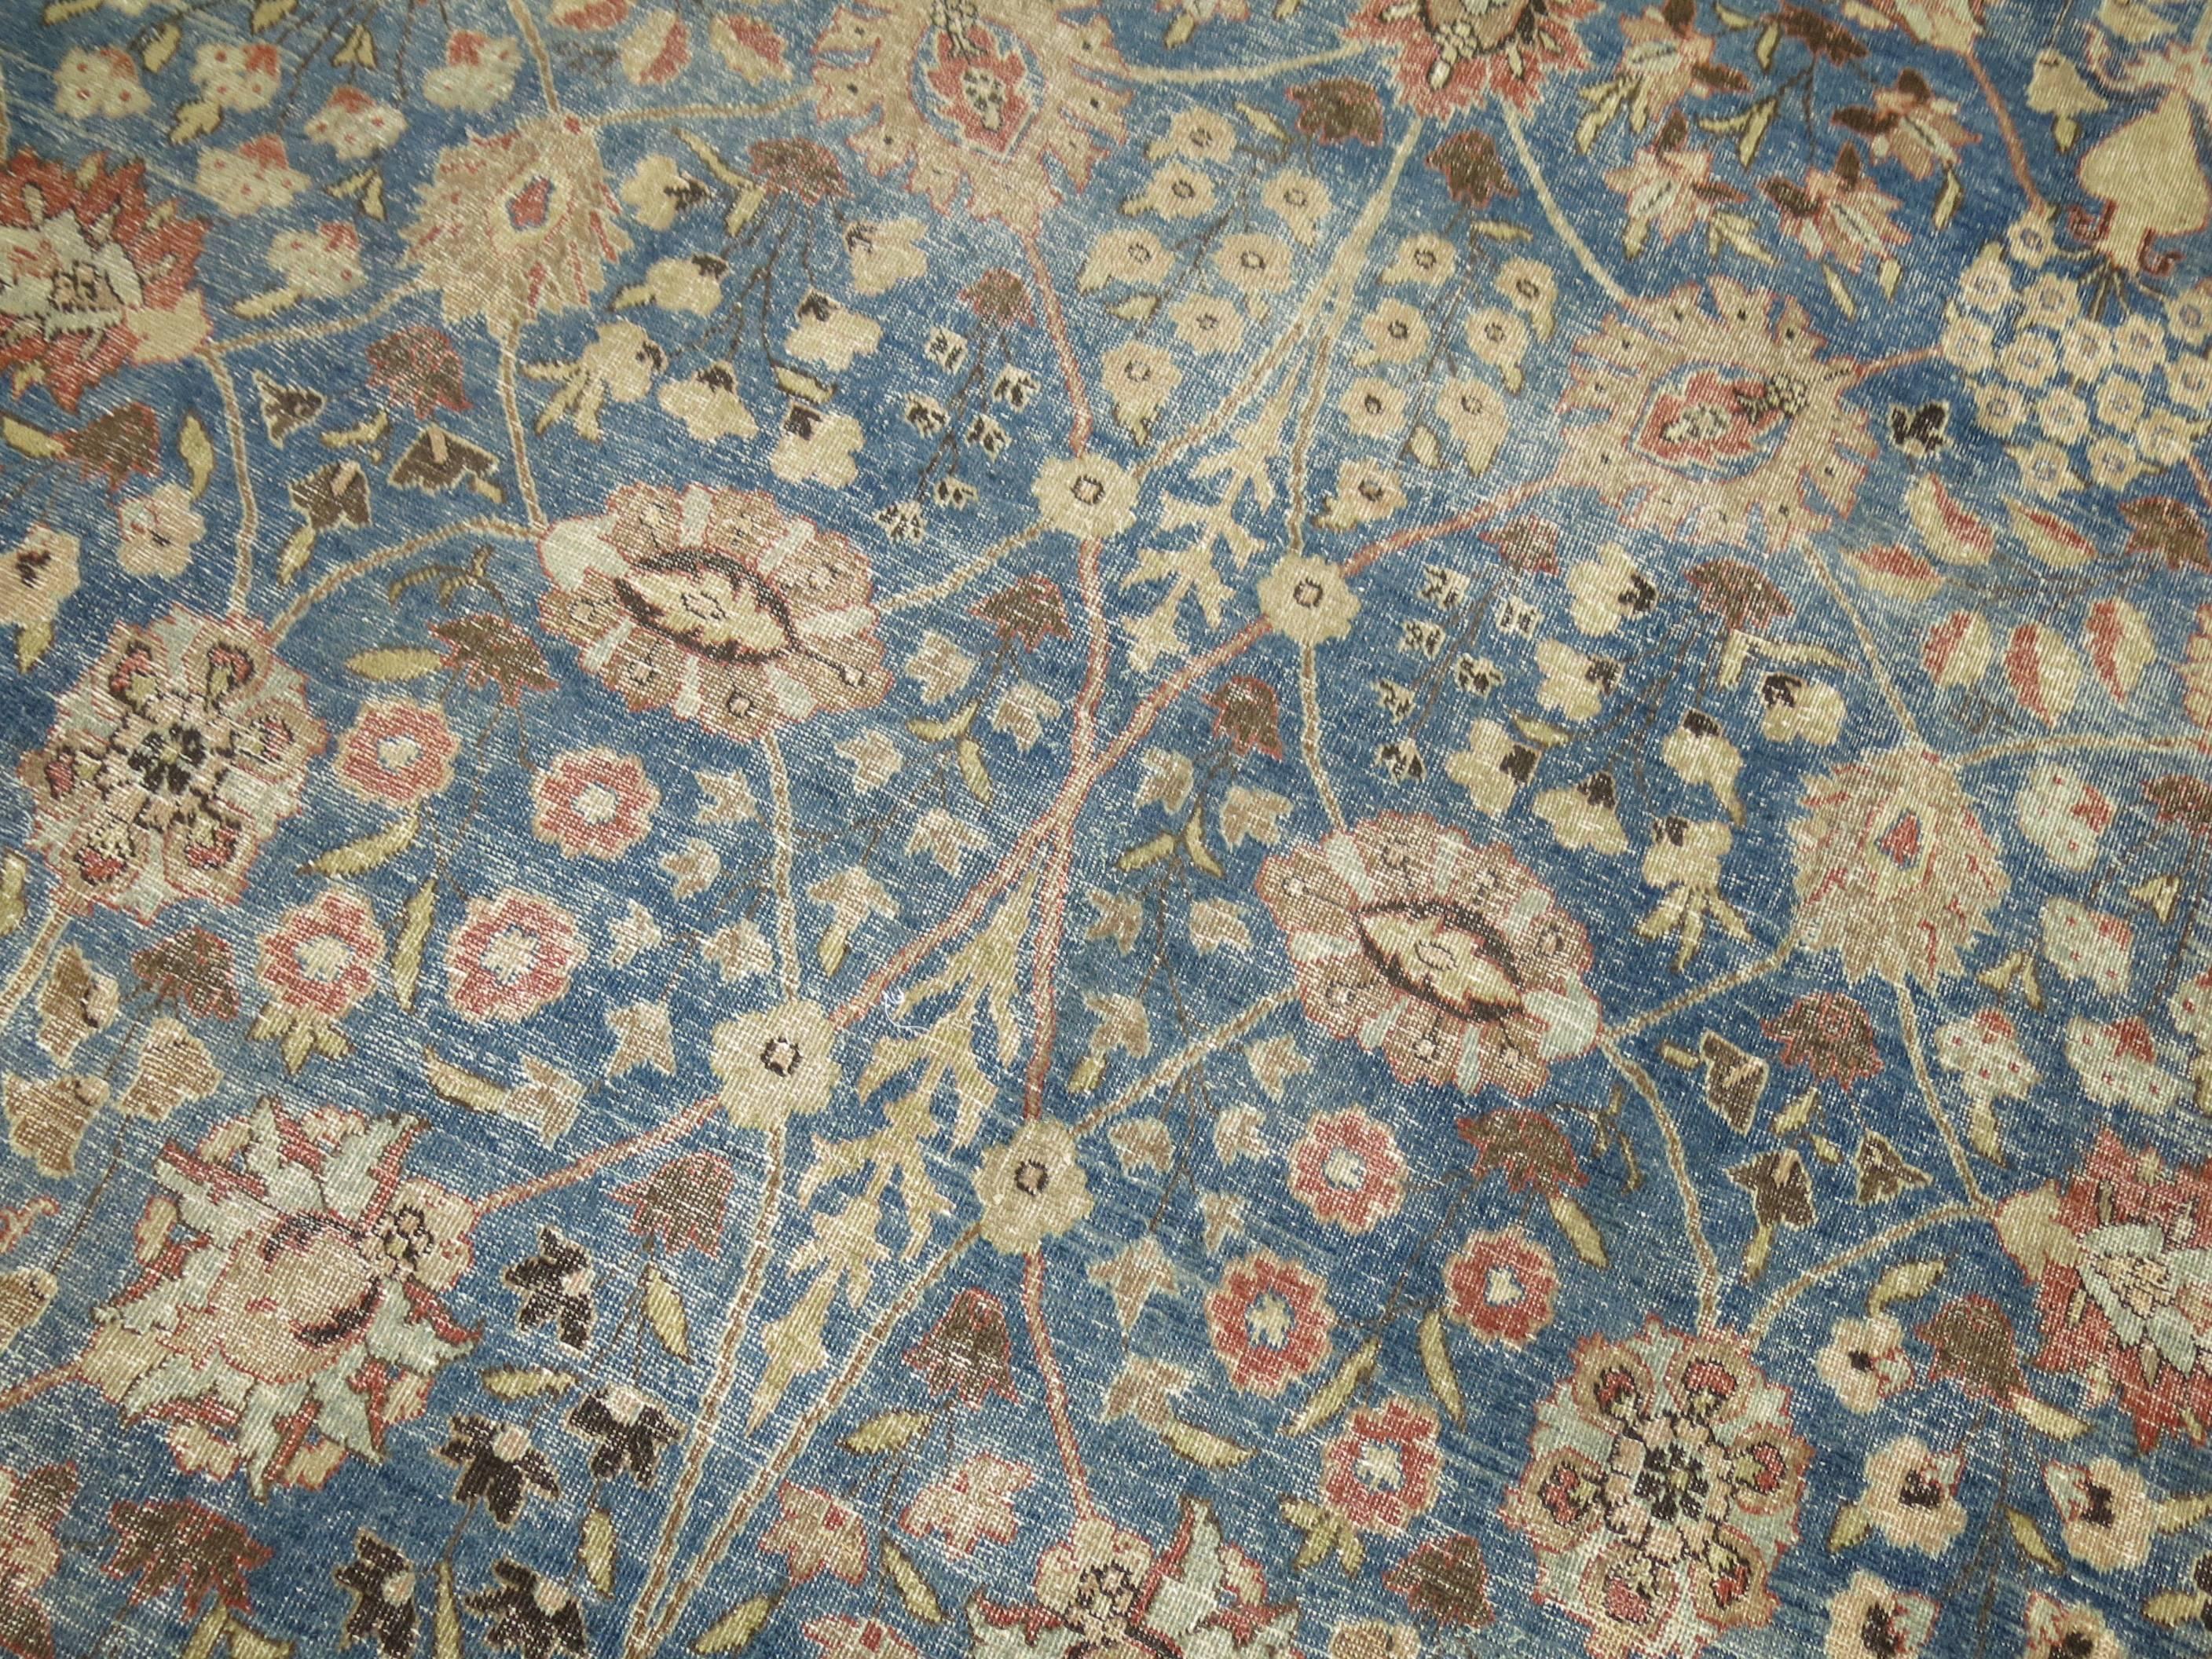 An authentic antique Persian Tabriz rug featuring a background color of 2020 Pantone color of the year Classic blue 19-4052,

circa 1920. Measures: 9'9